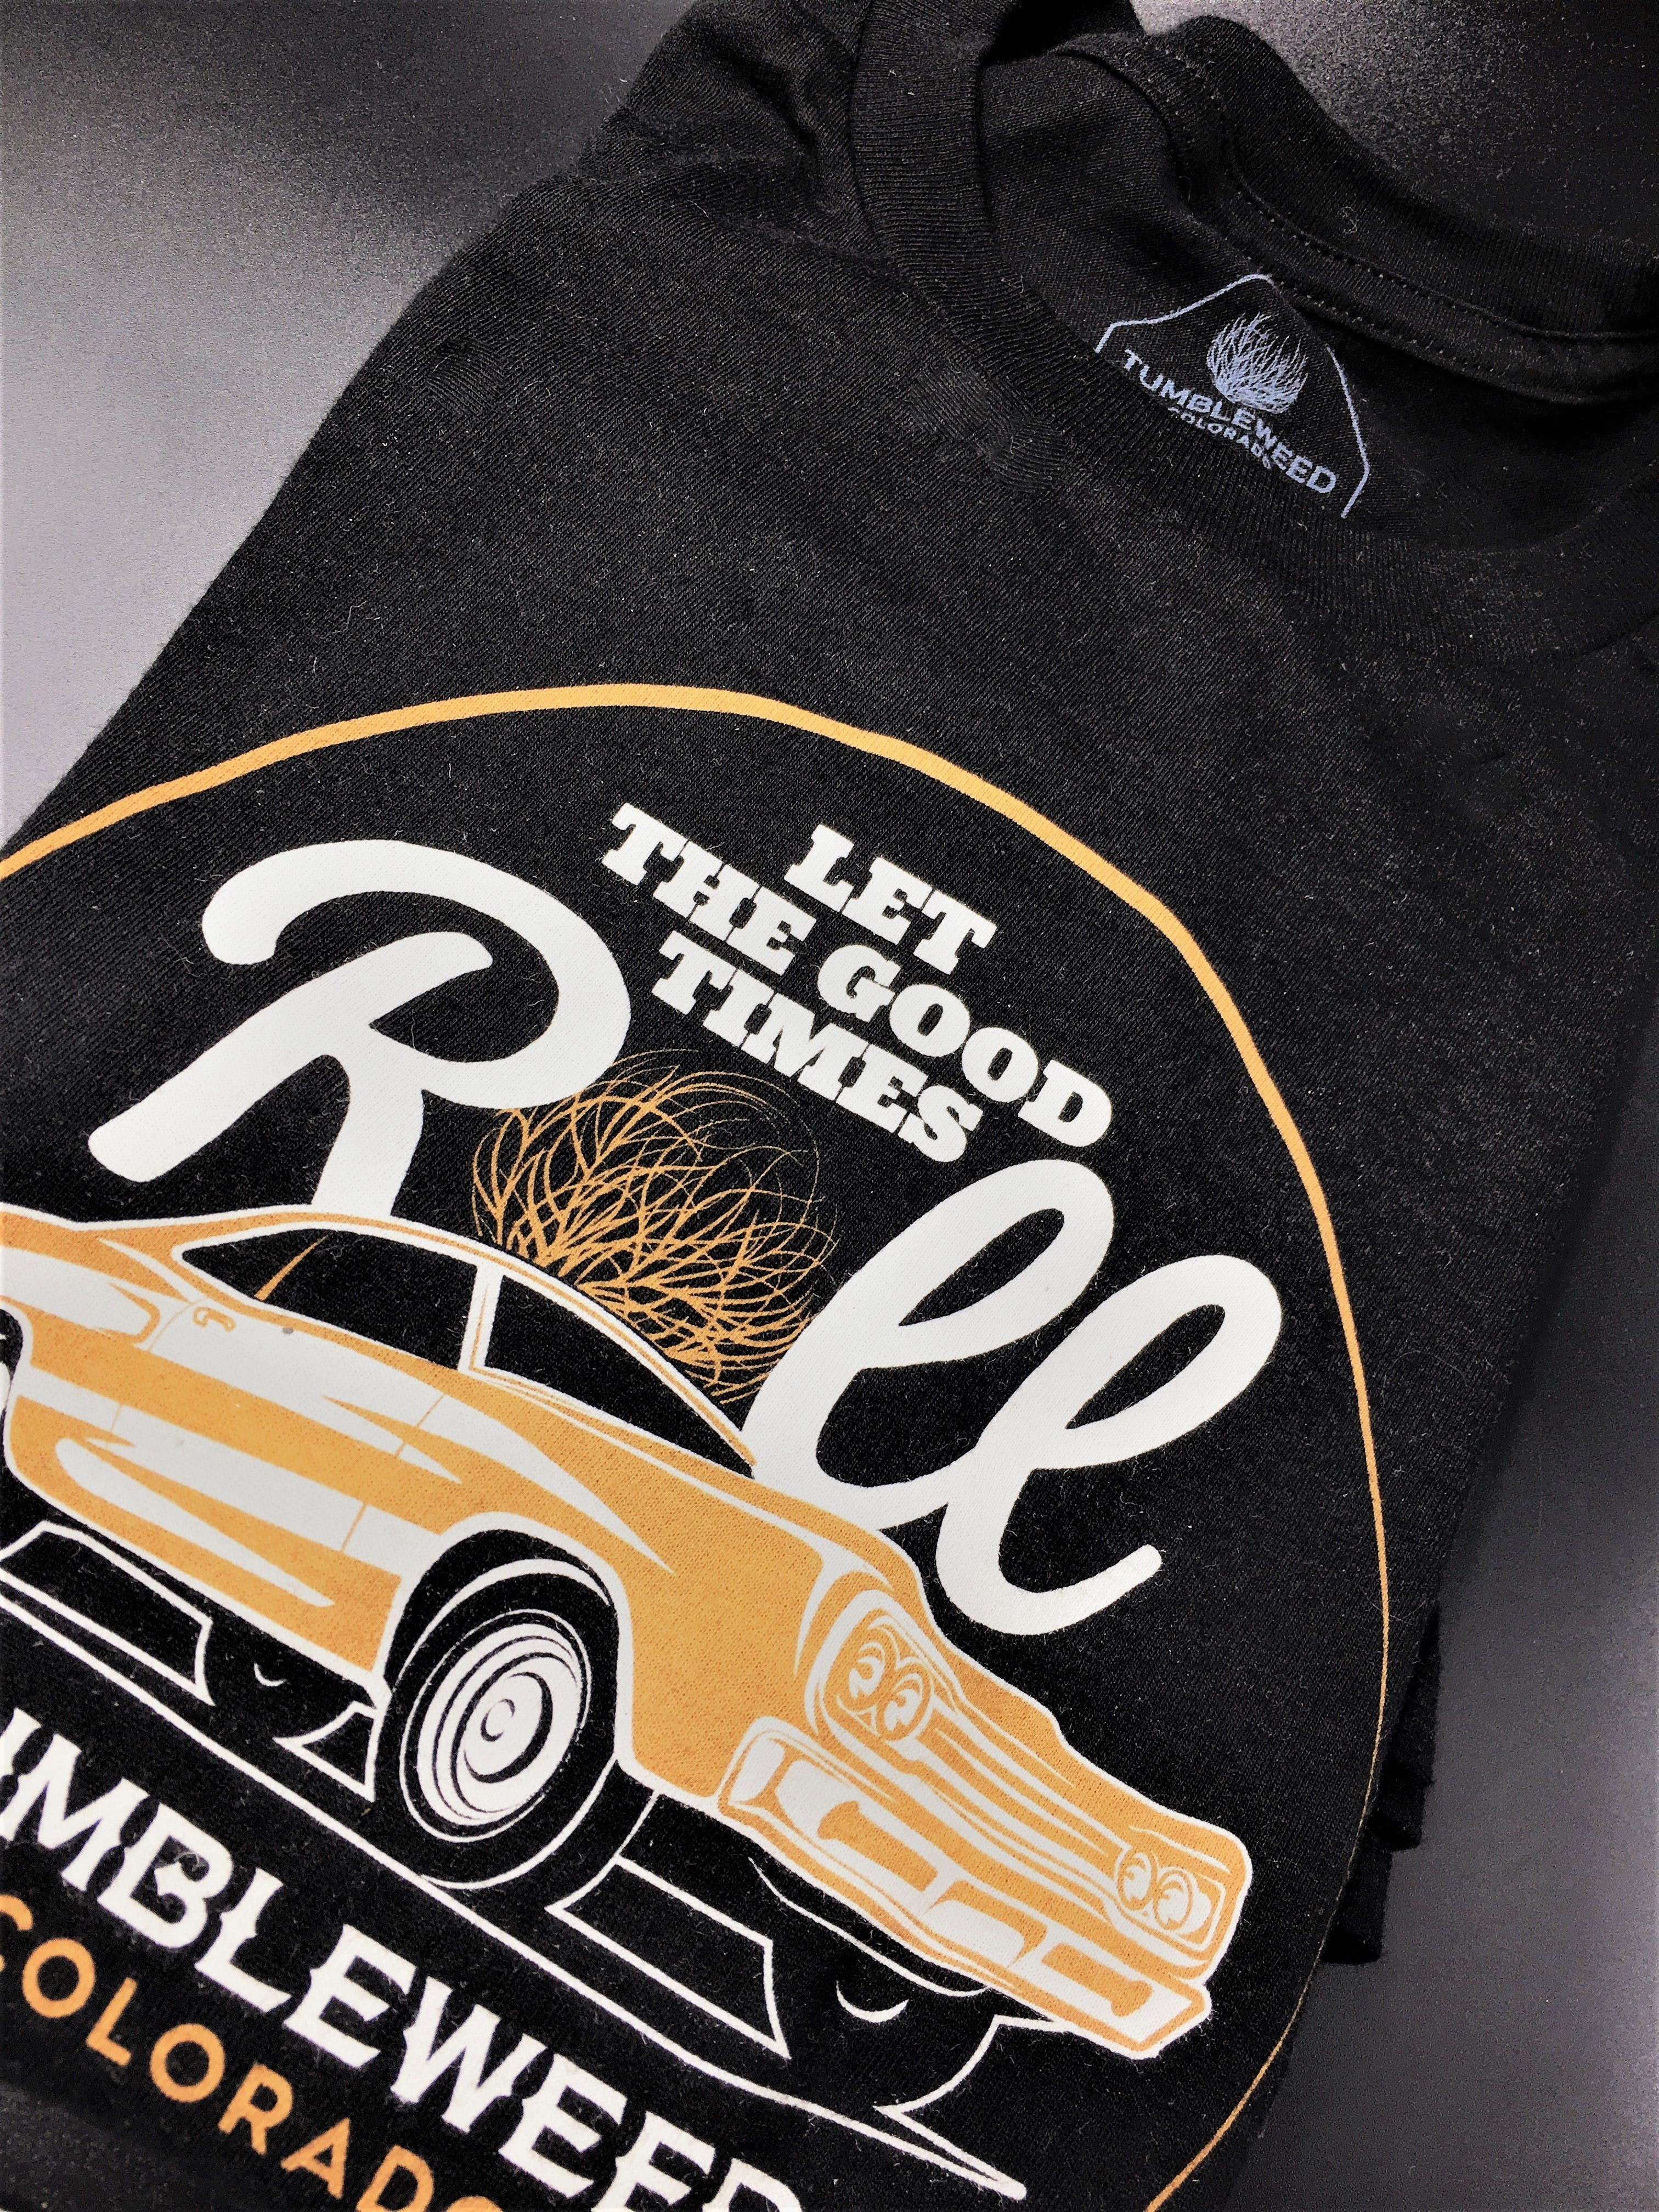 gear-tumbleweed-let-the-good-times-roll-tshirts